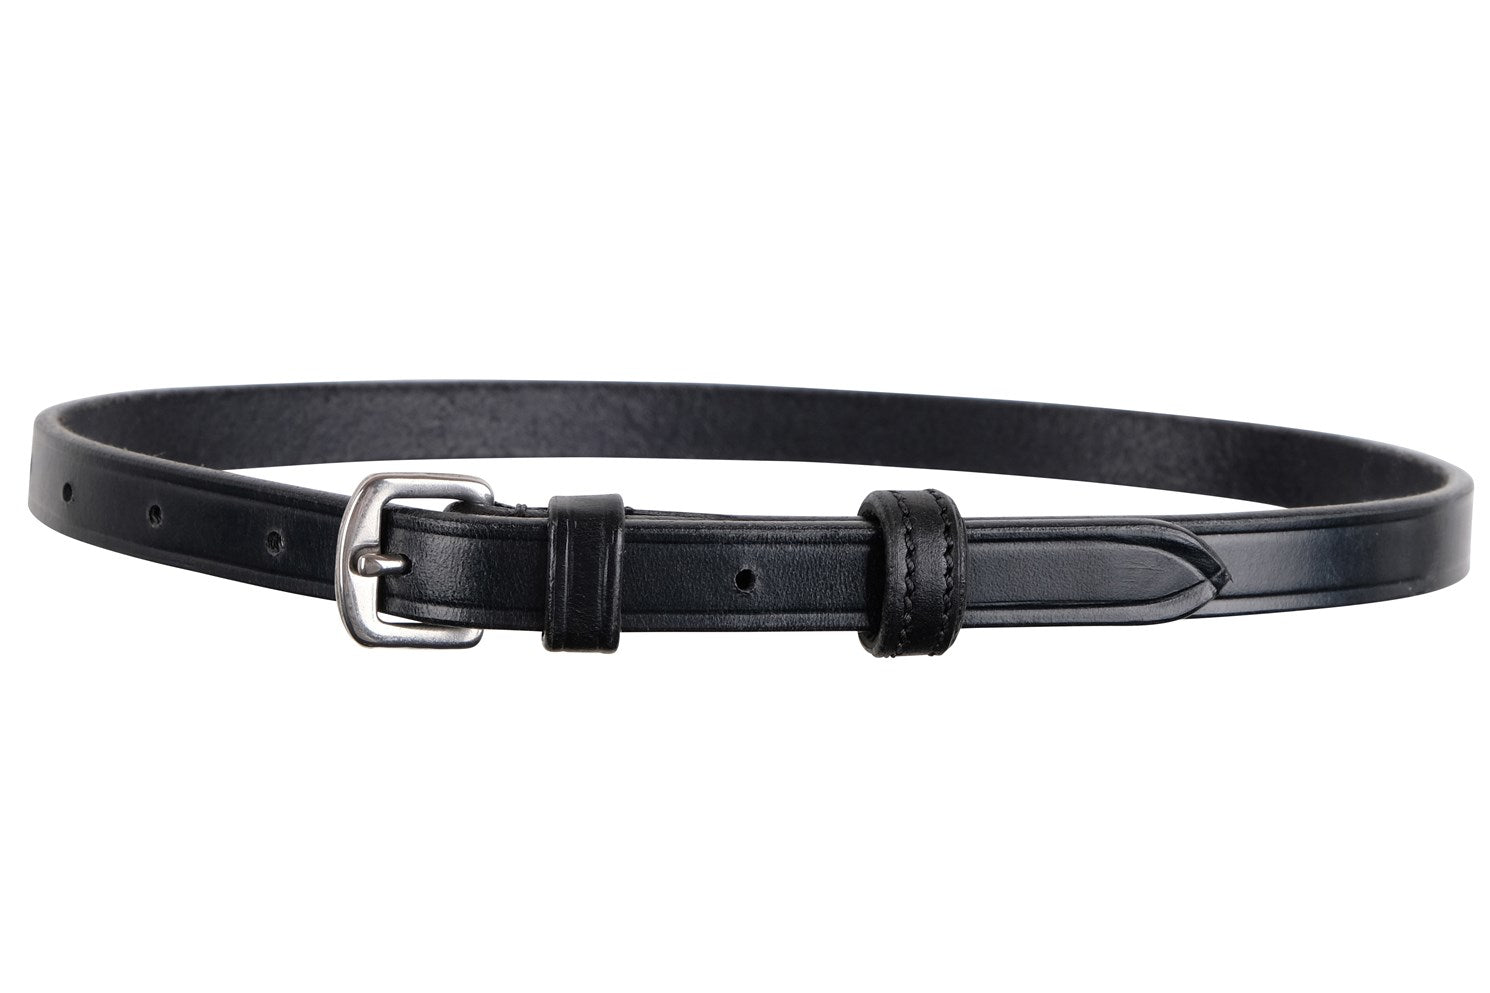 Flash strap in black leather